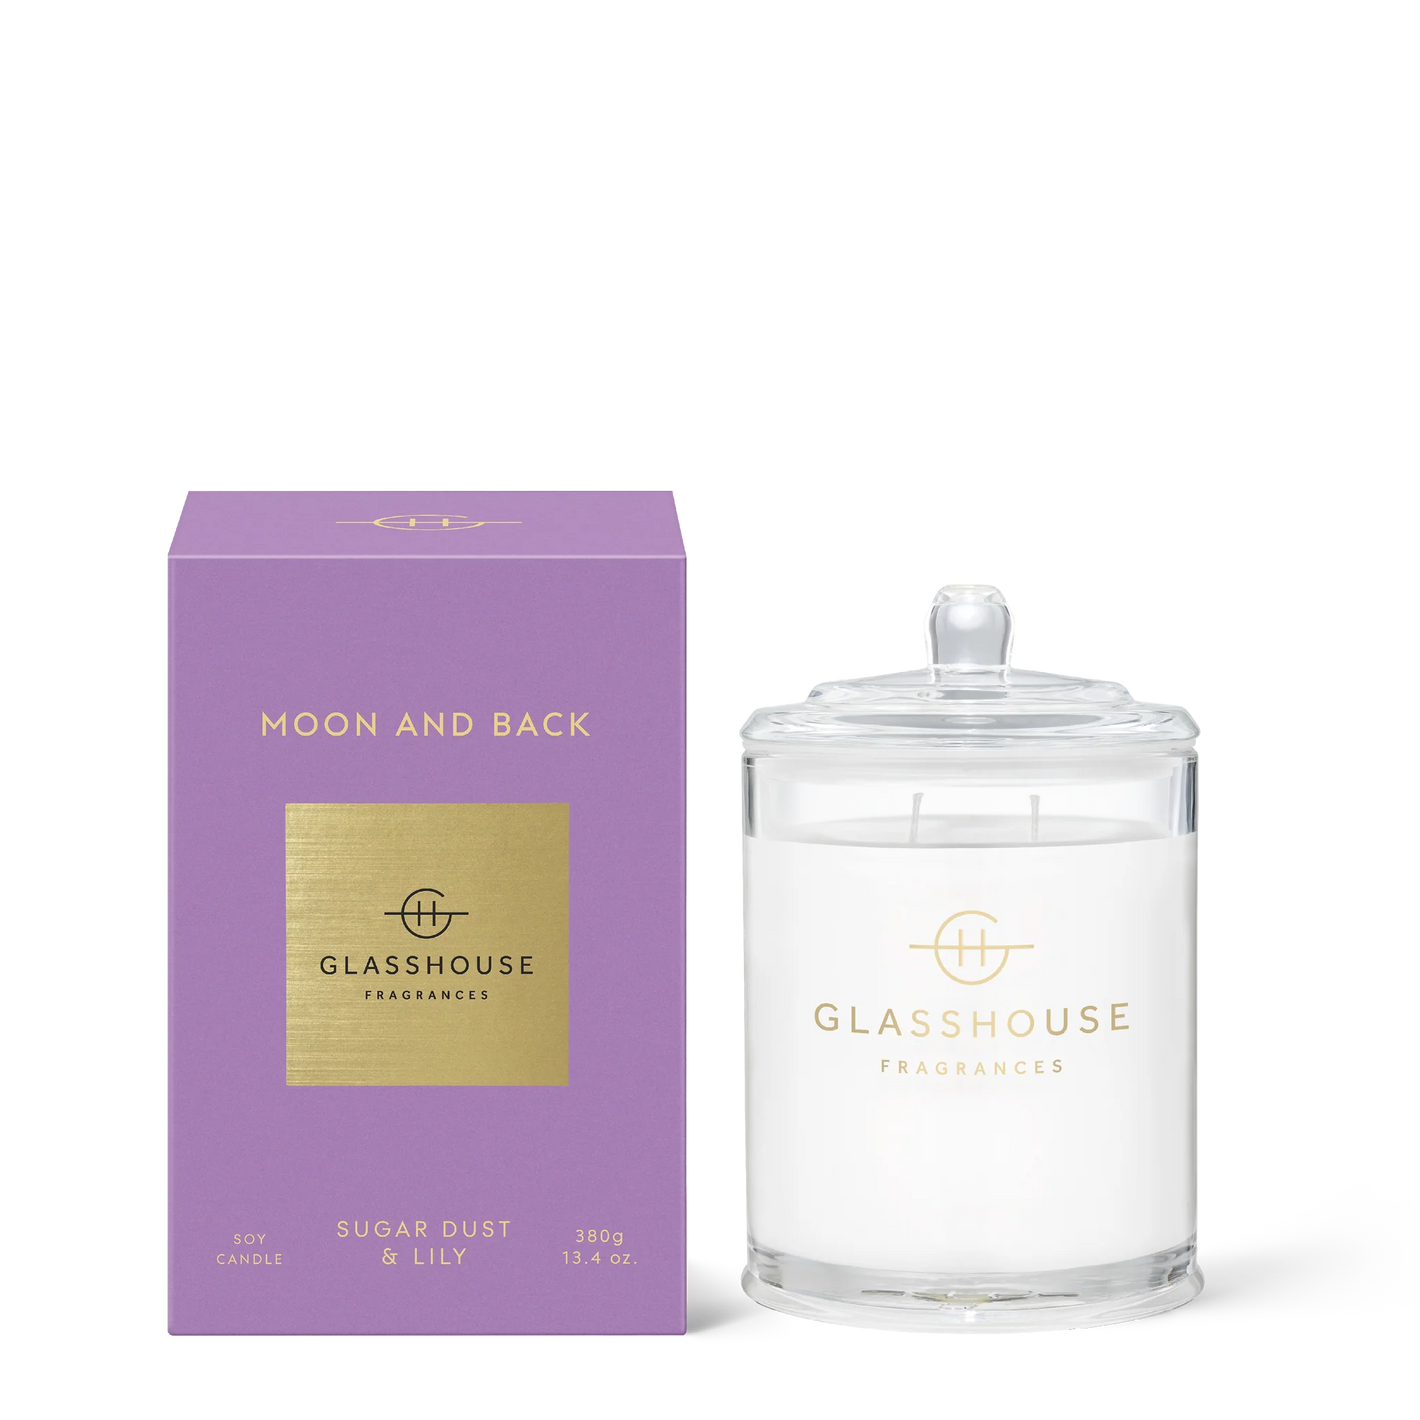 Glasshouse Fragrances MOON AND BACK 380g Triple Scented Soy Candle